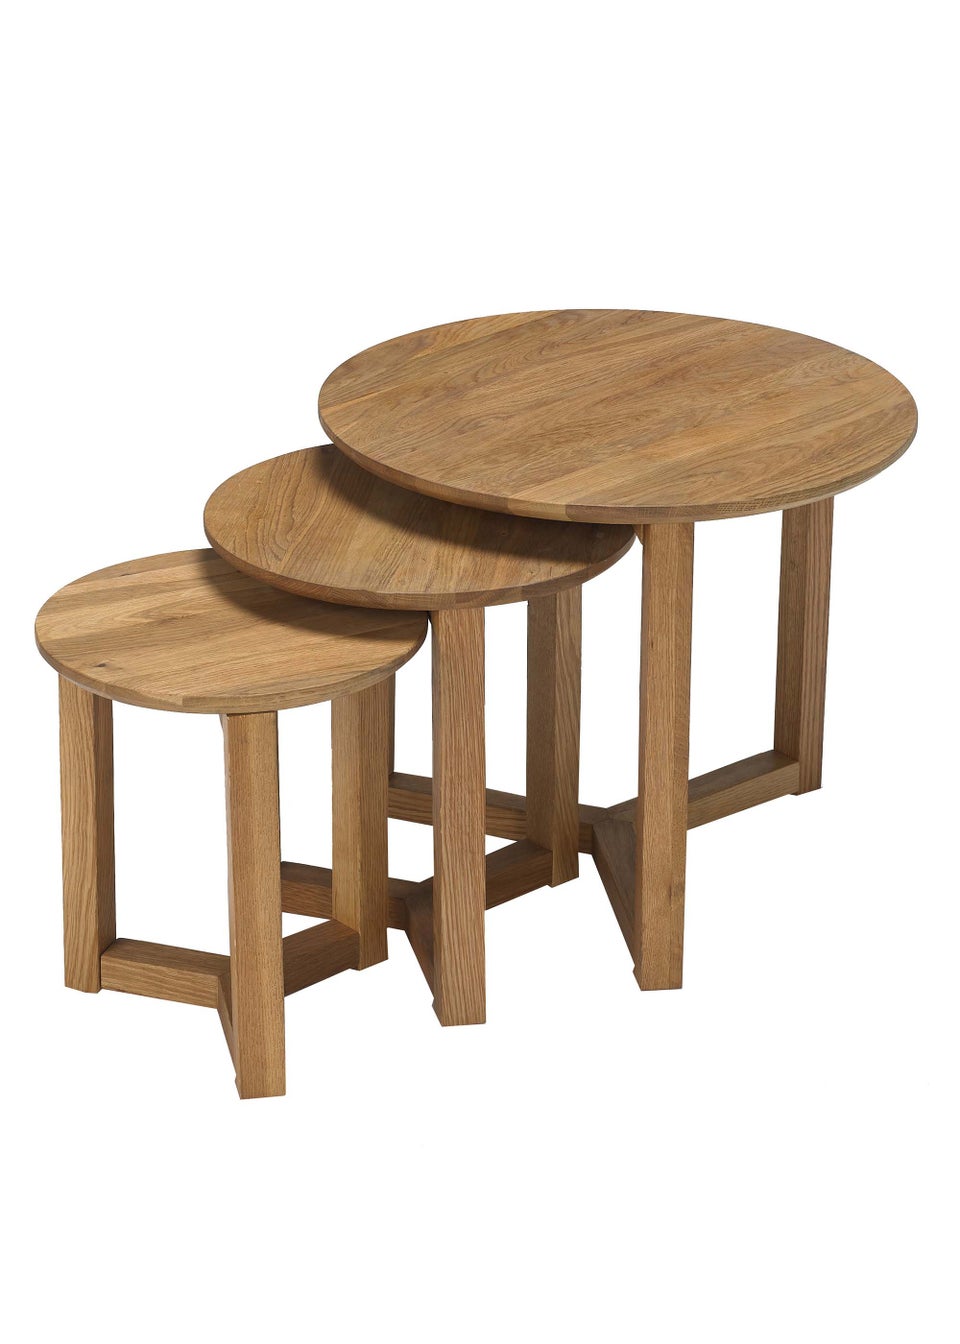 LPD Furniture Stow Nest Of Tables Oak (420x500x500mm)